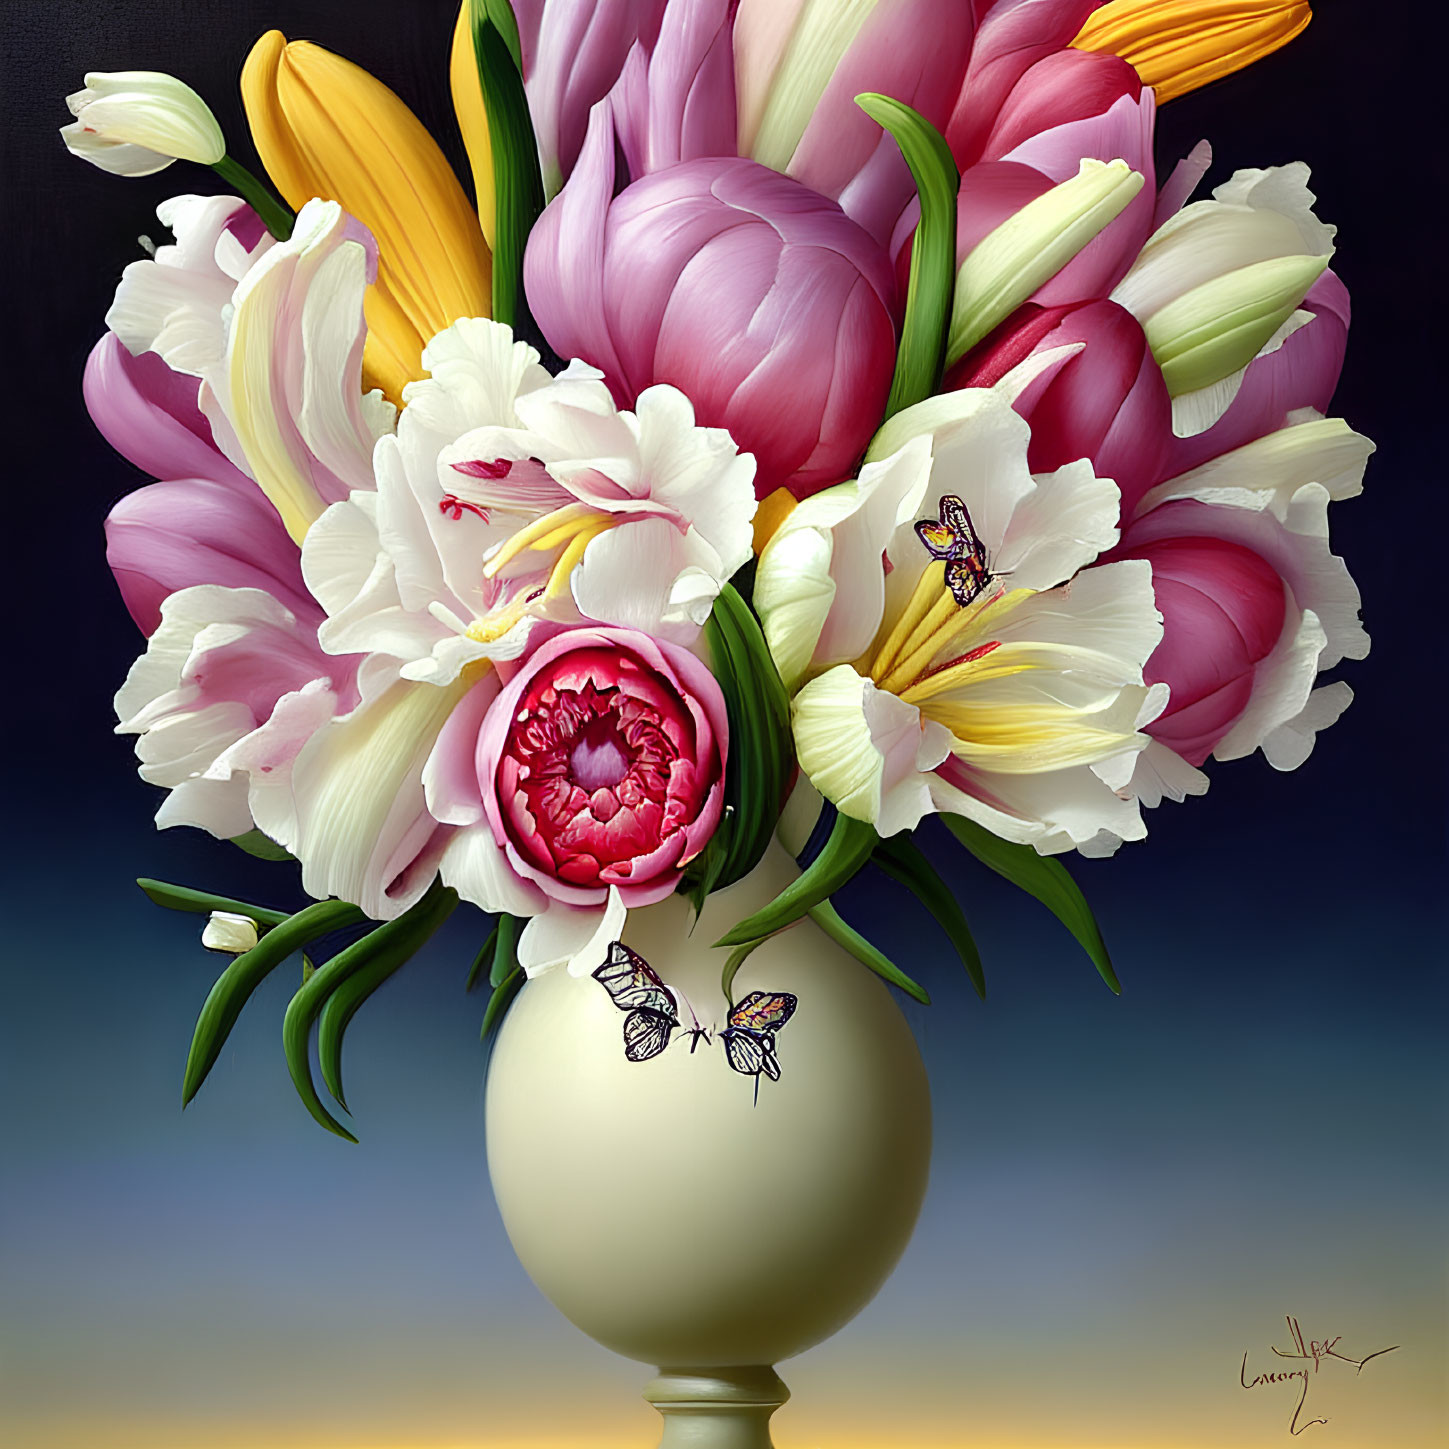 Colorful Flower Bouquet in Cream Vase with Butterflies on Dark Background